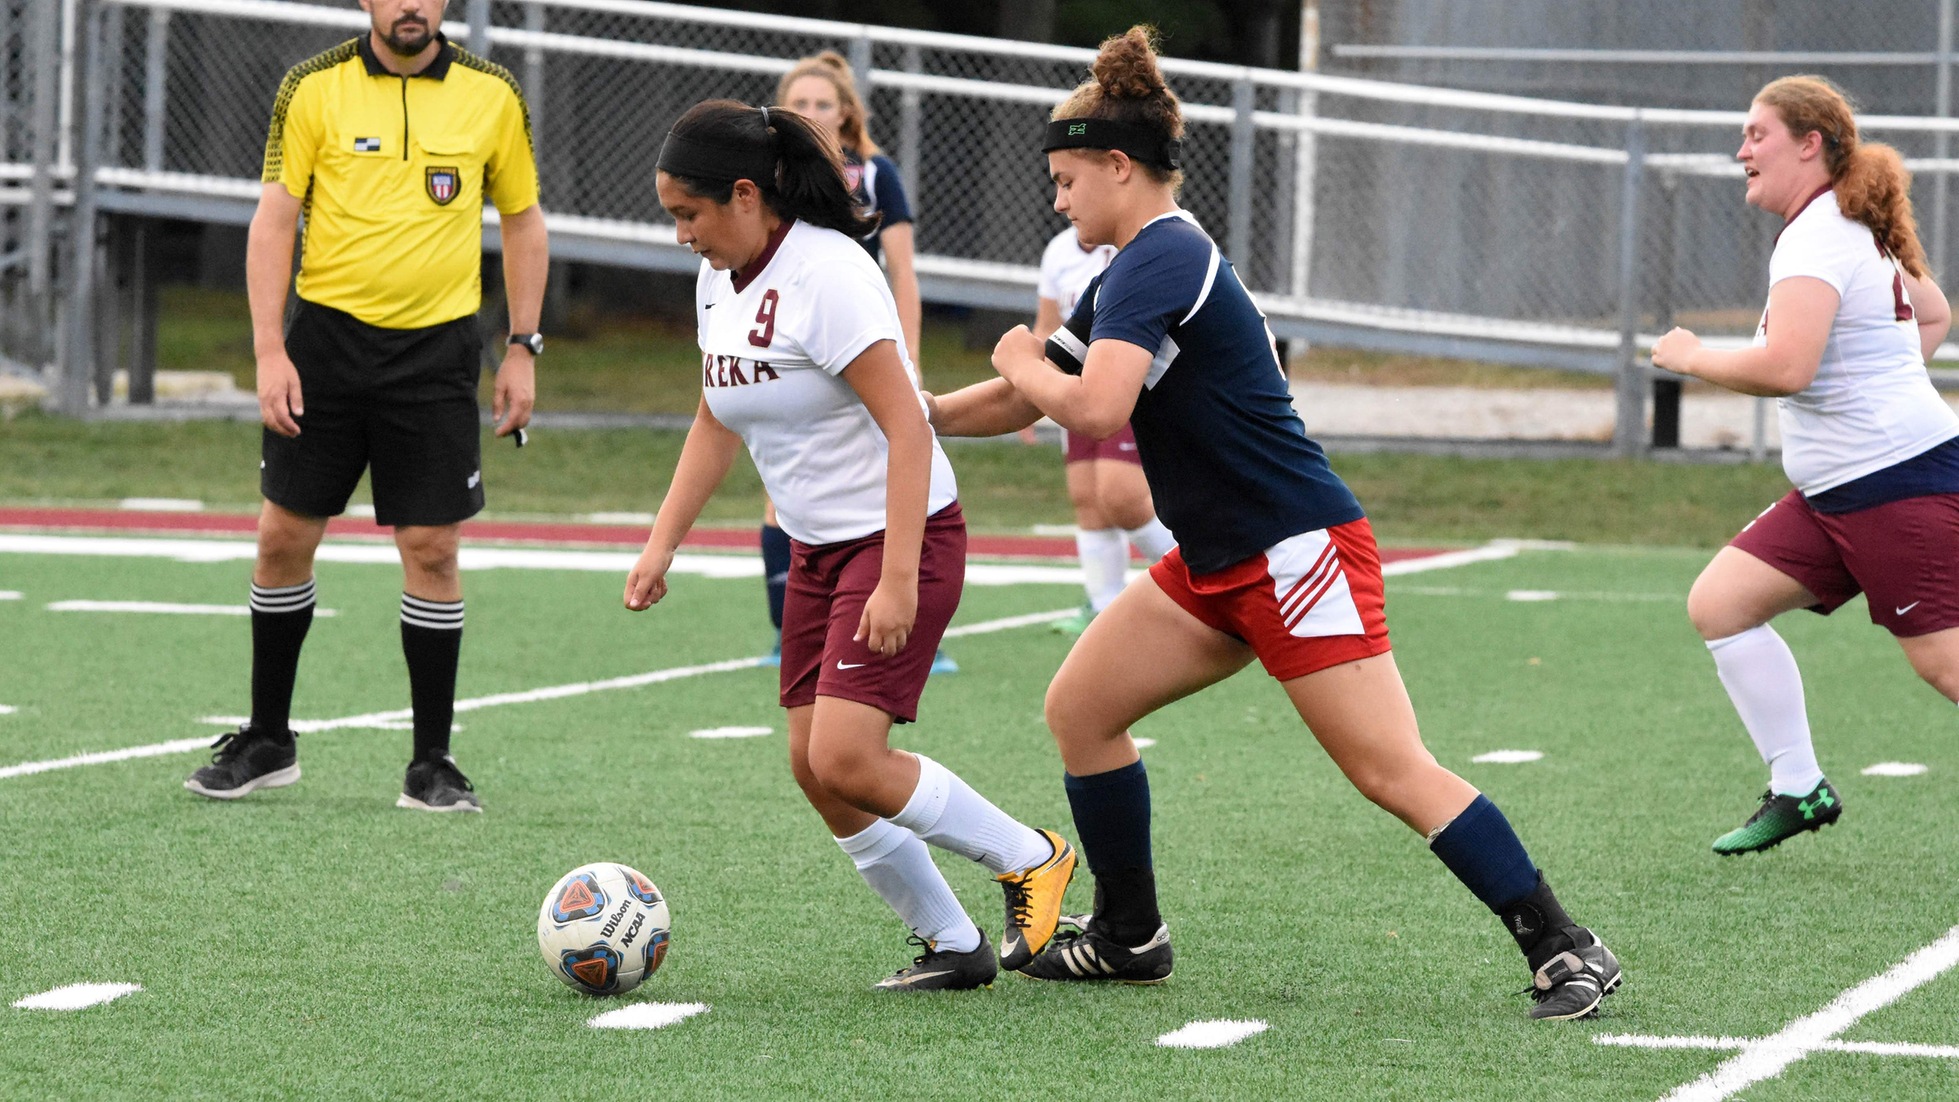 Faith Baptist Bible Prevails Over Red Devils, 4-0